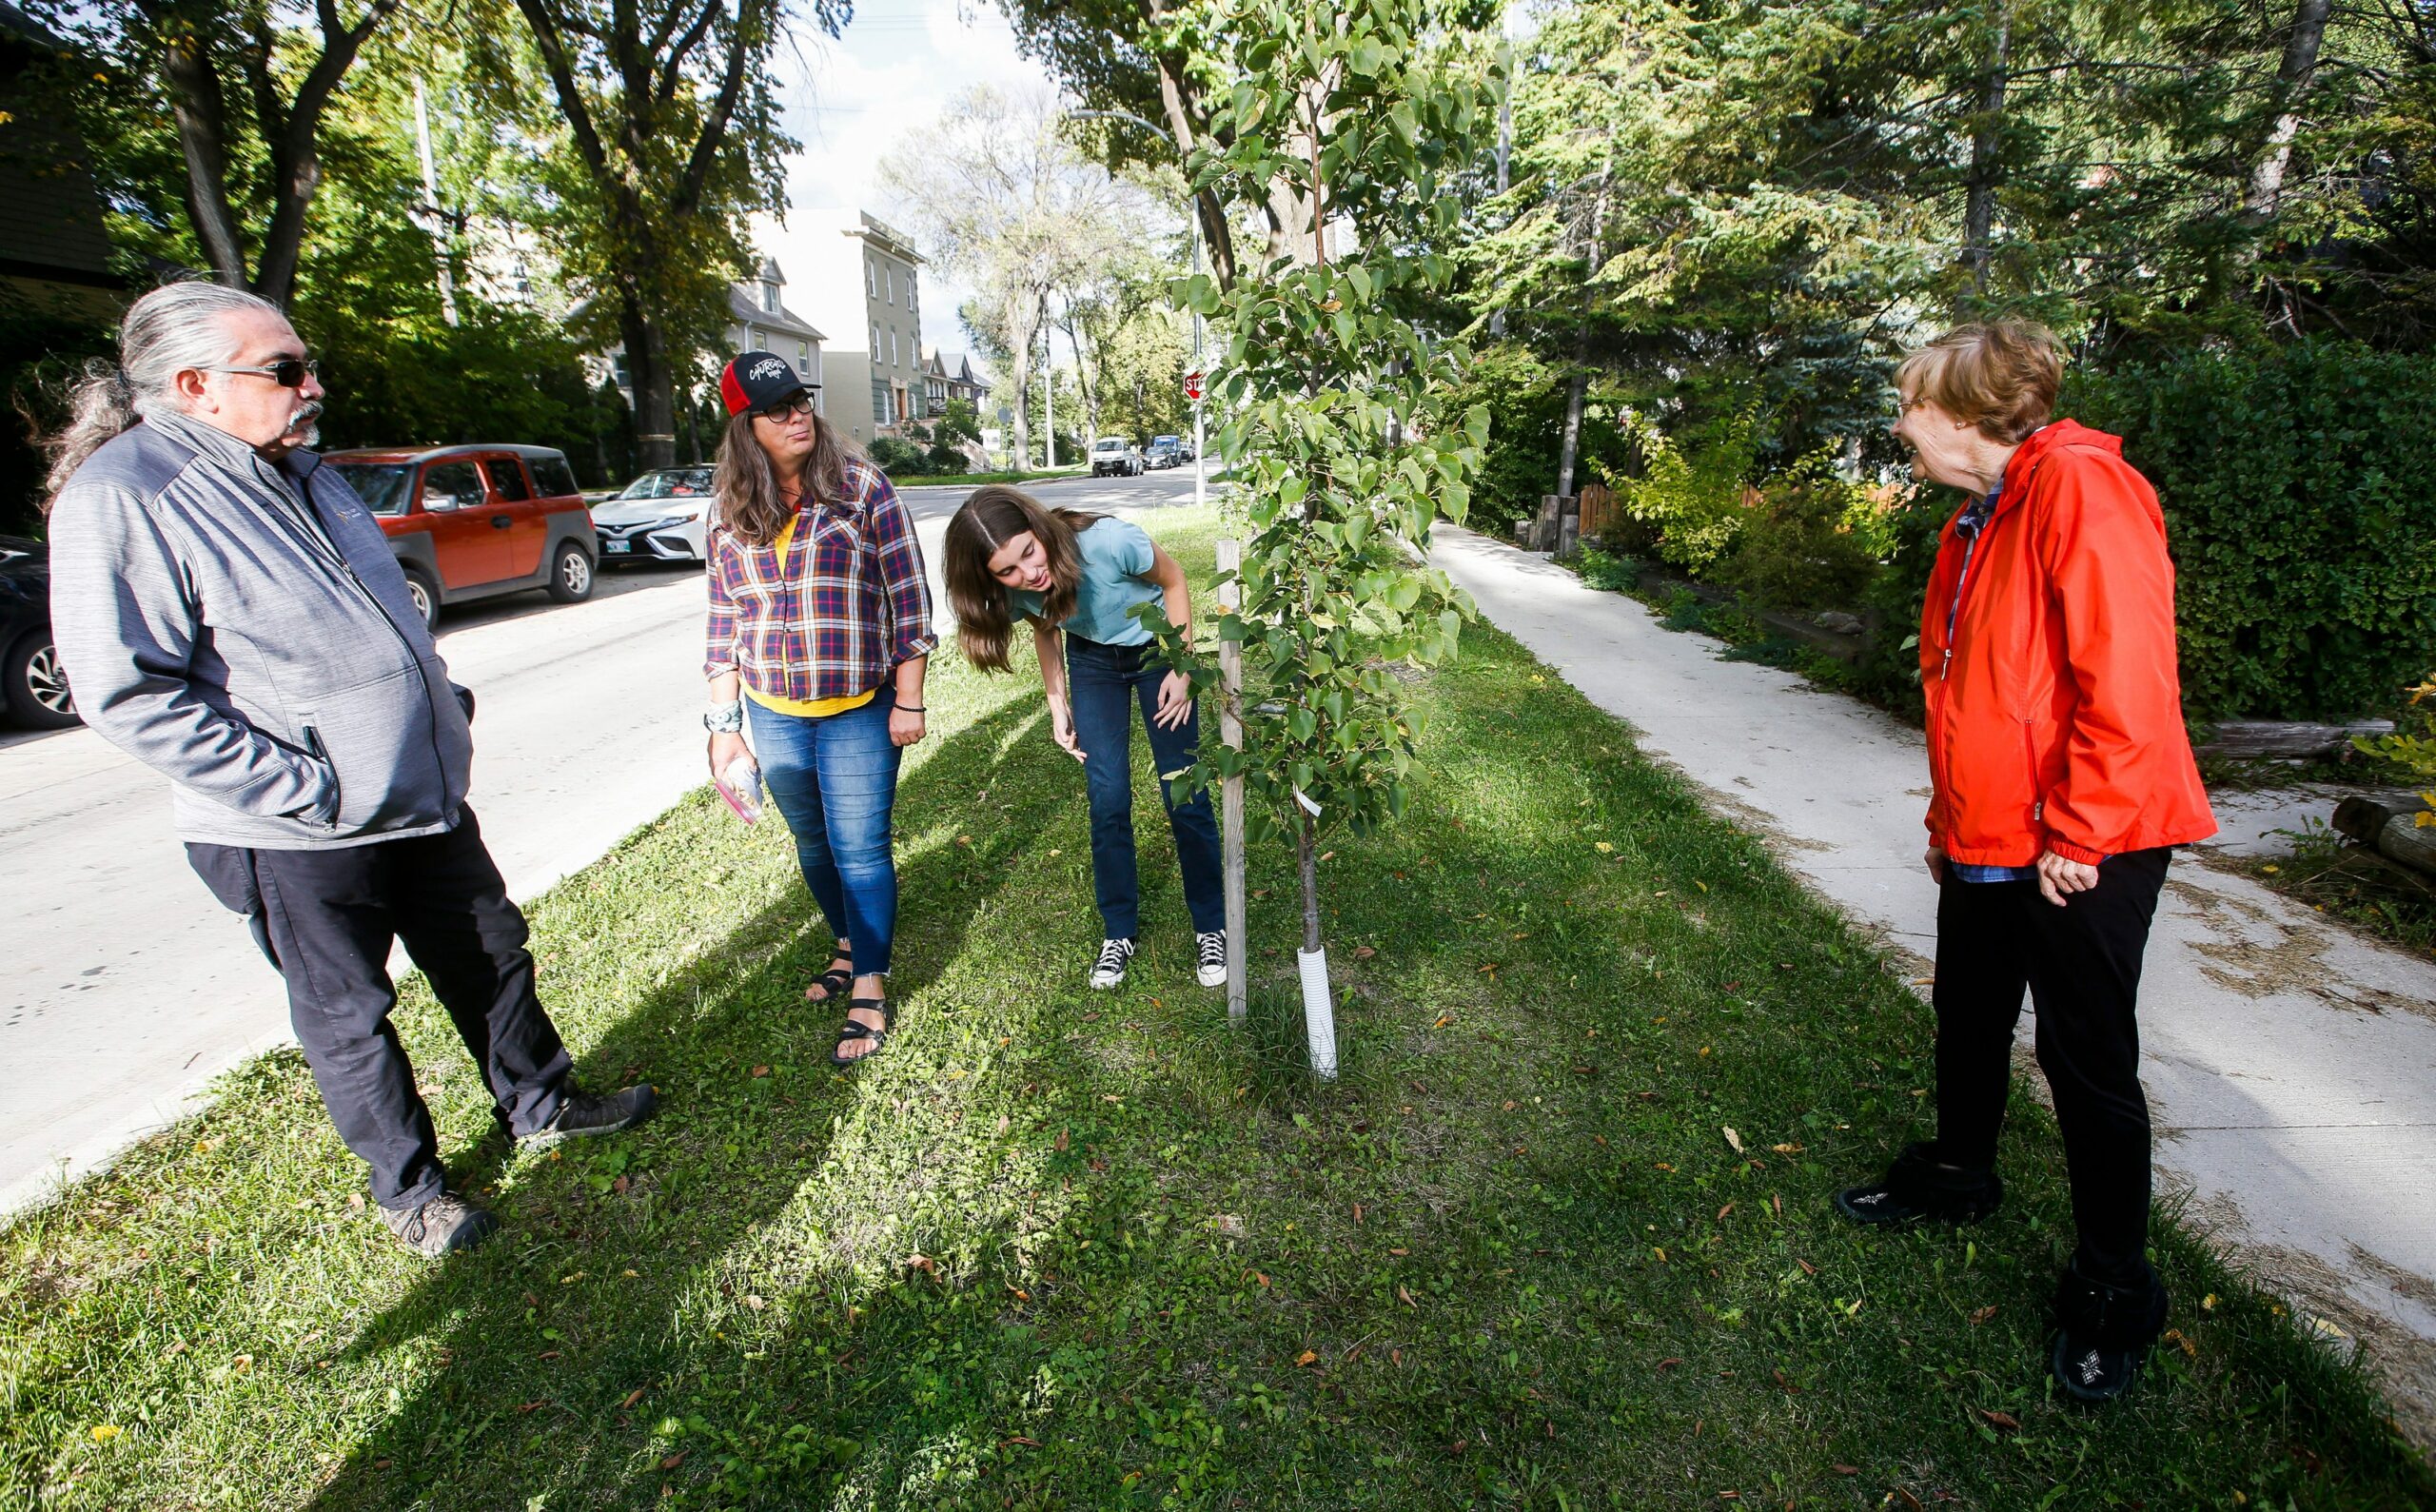 Three members of the Mulvey Trees group stand around a sapling they planted. One person leans down to inspect the tree while the other three look on